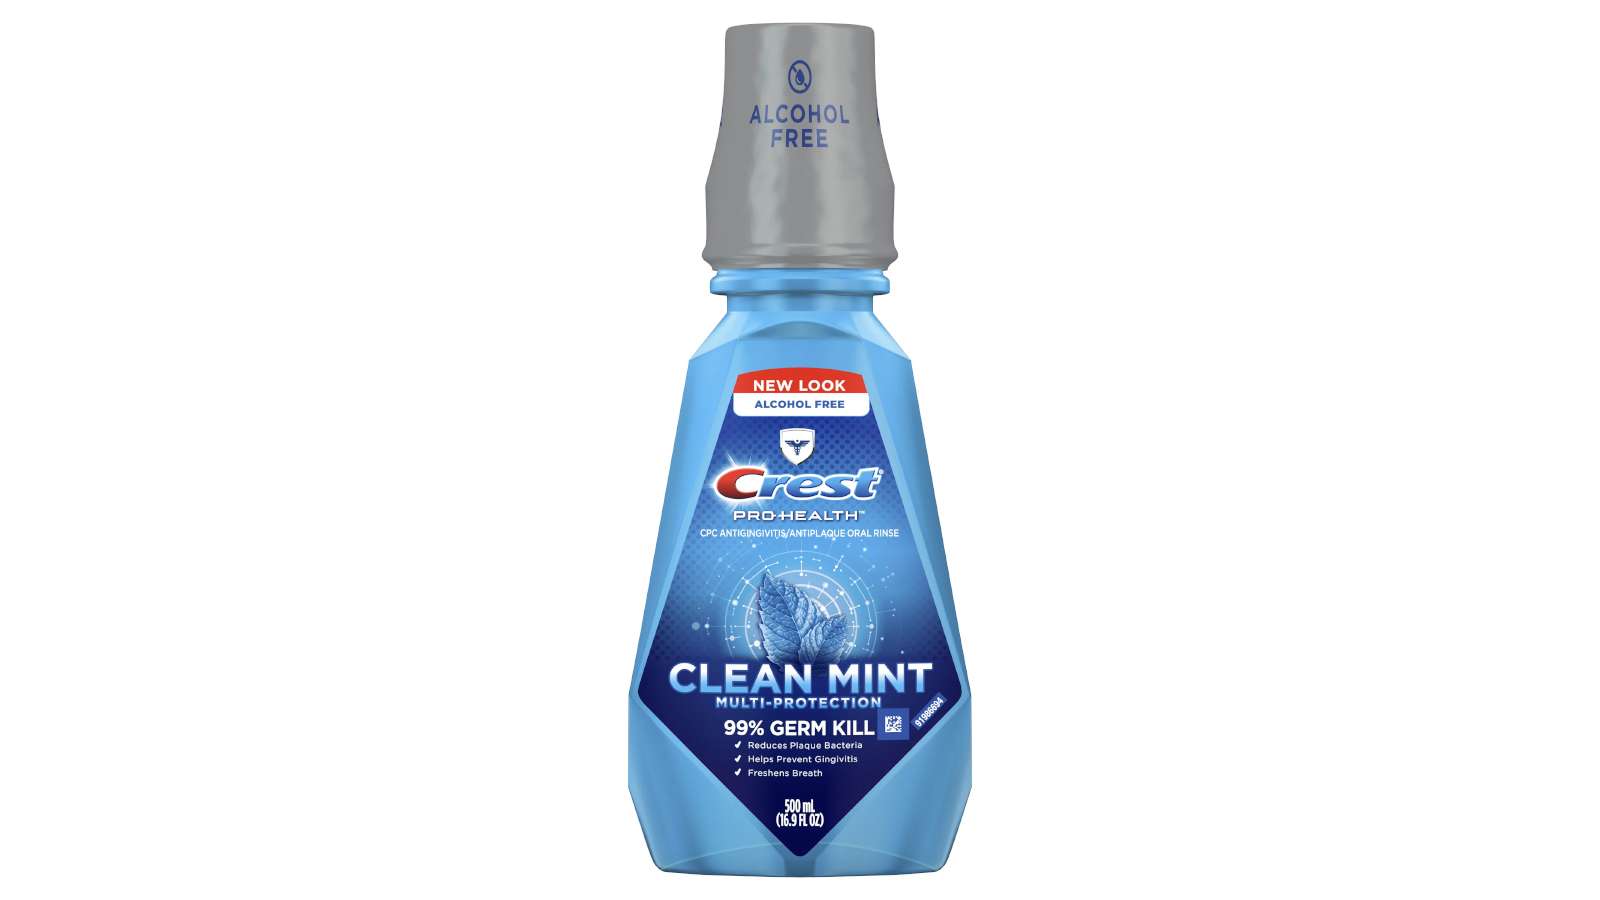 bad breath mouthwashes reviews - bottle of crest pro-health multi-protection mouthwash, refreshing clean mint 16.90 oz